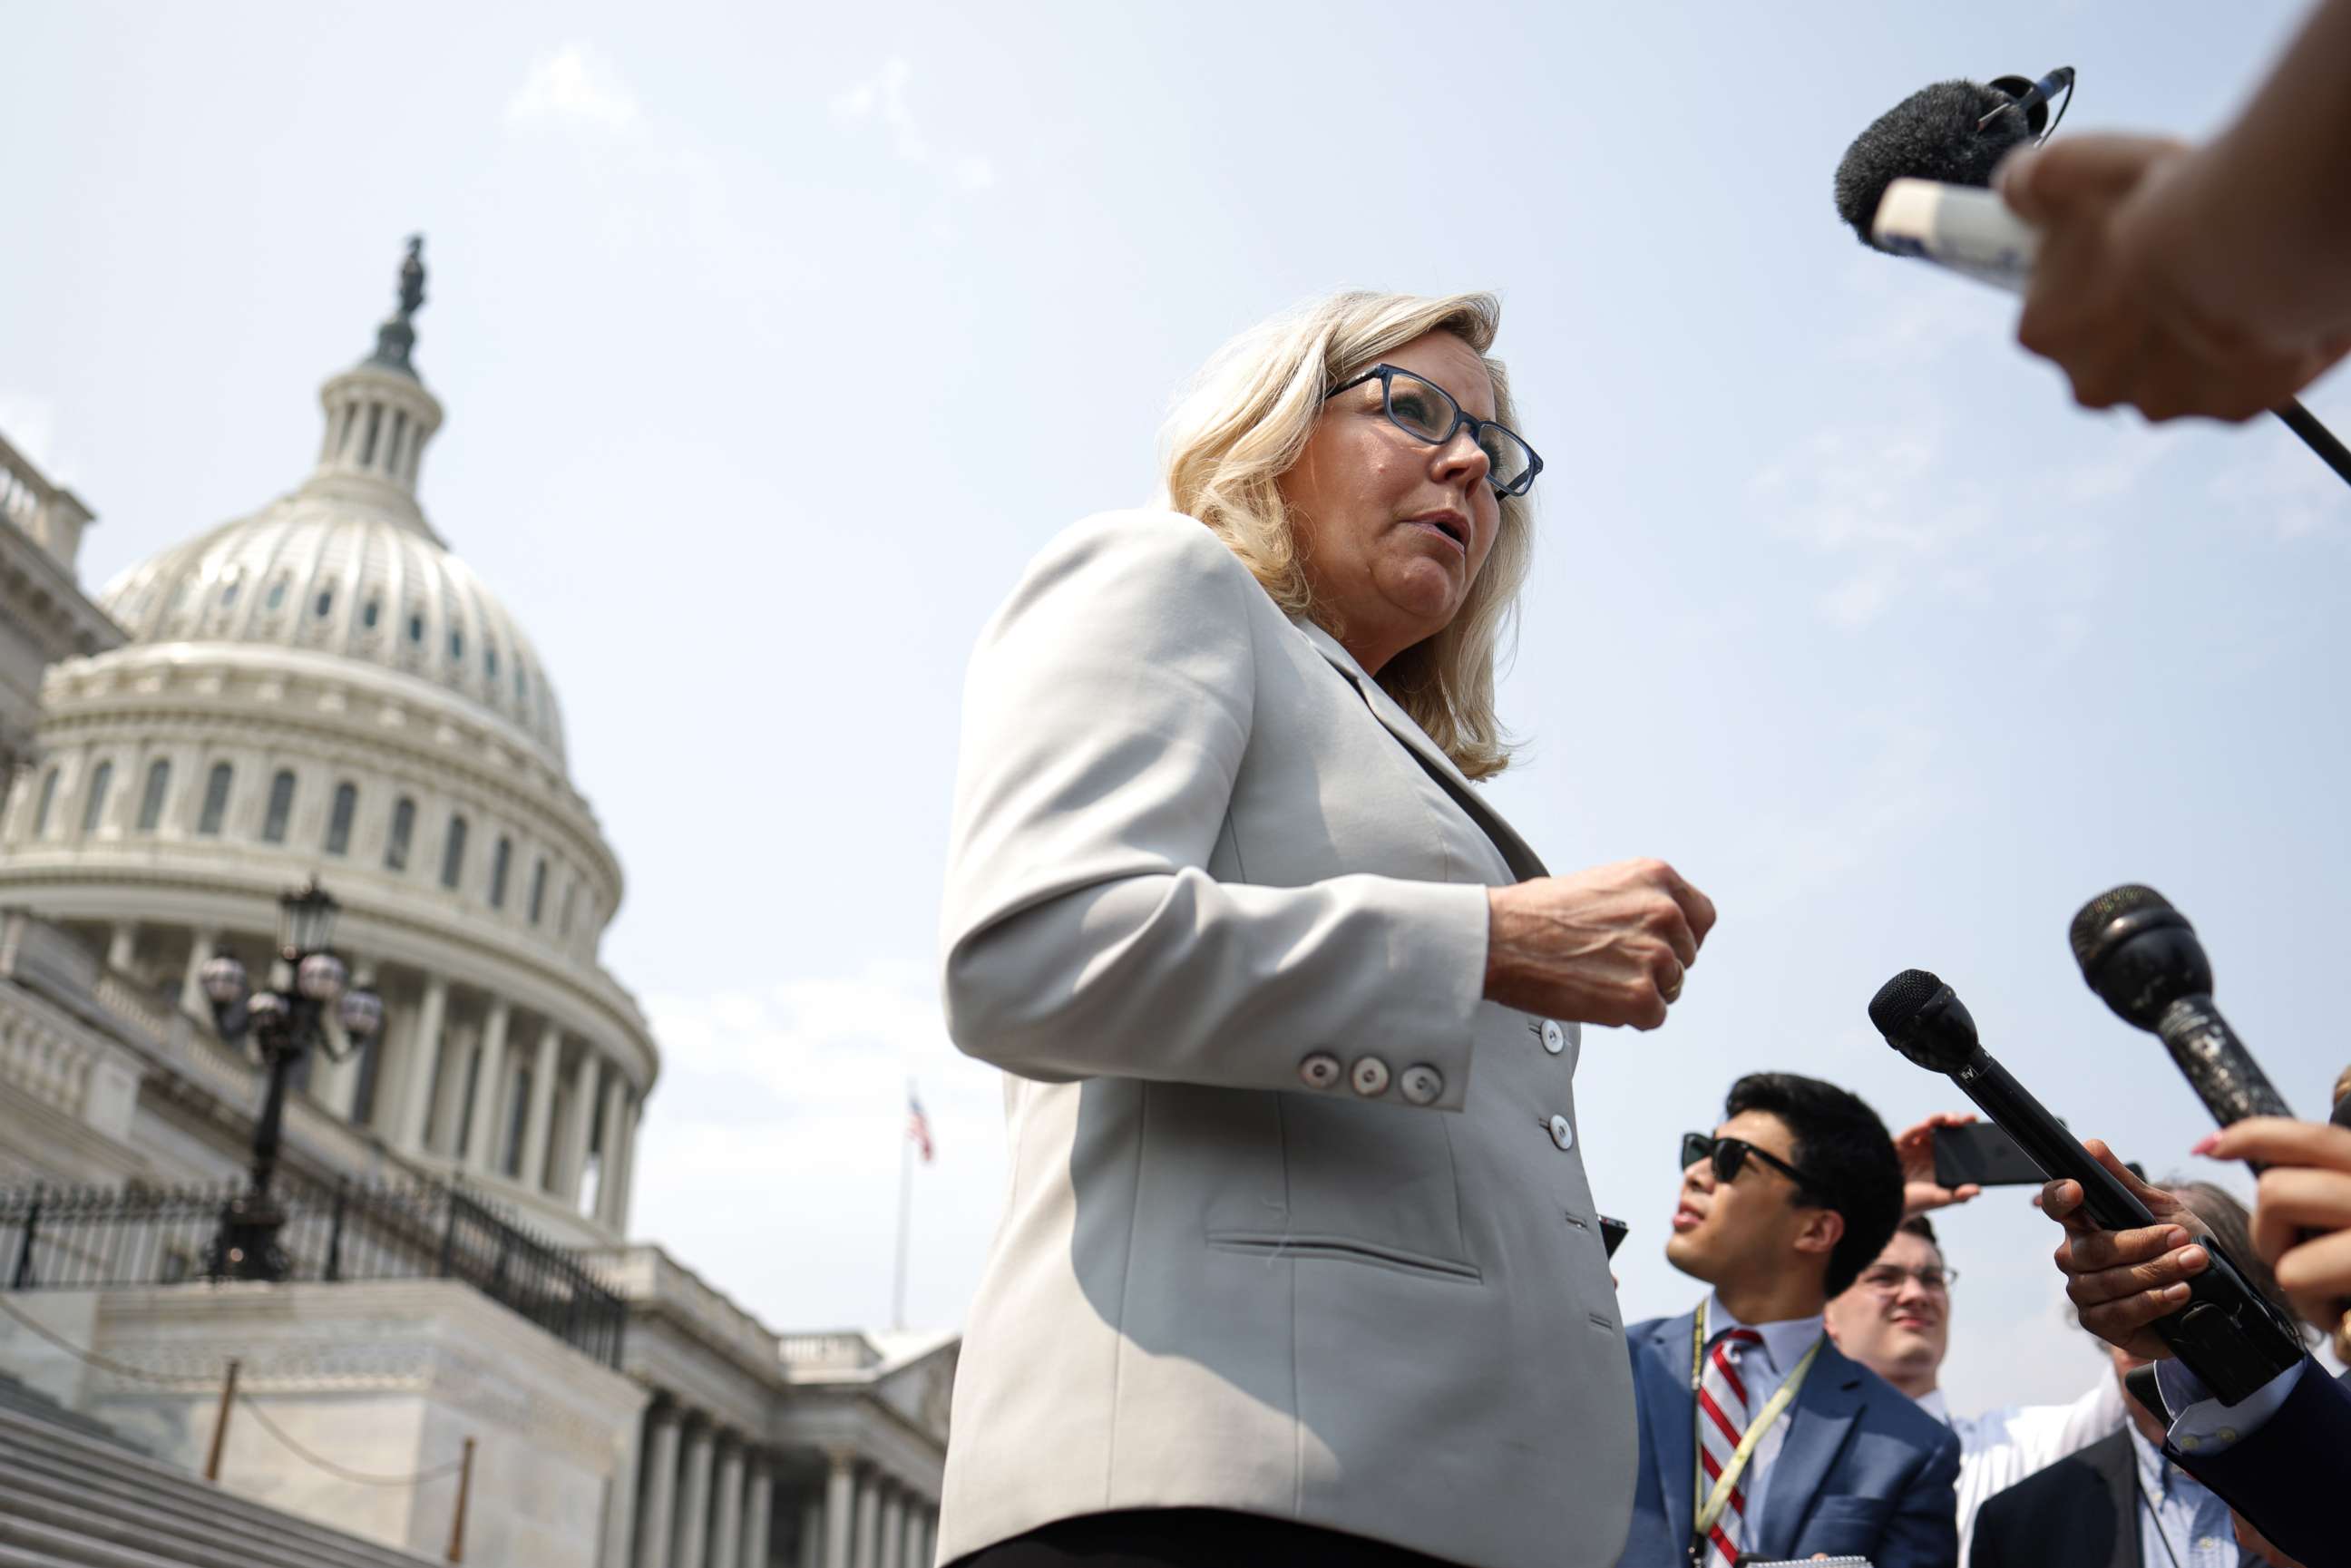 PHOTO: U.S. Rep. Liz Cheney, R-Wyo., speaks to reporters outside of the U.S. Capitol on July 21, 2021, in Washington, D.C.